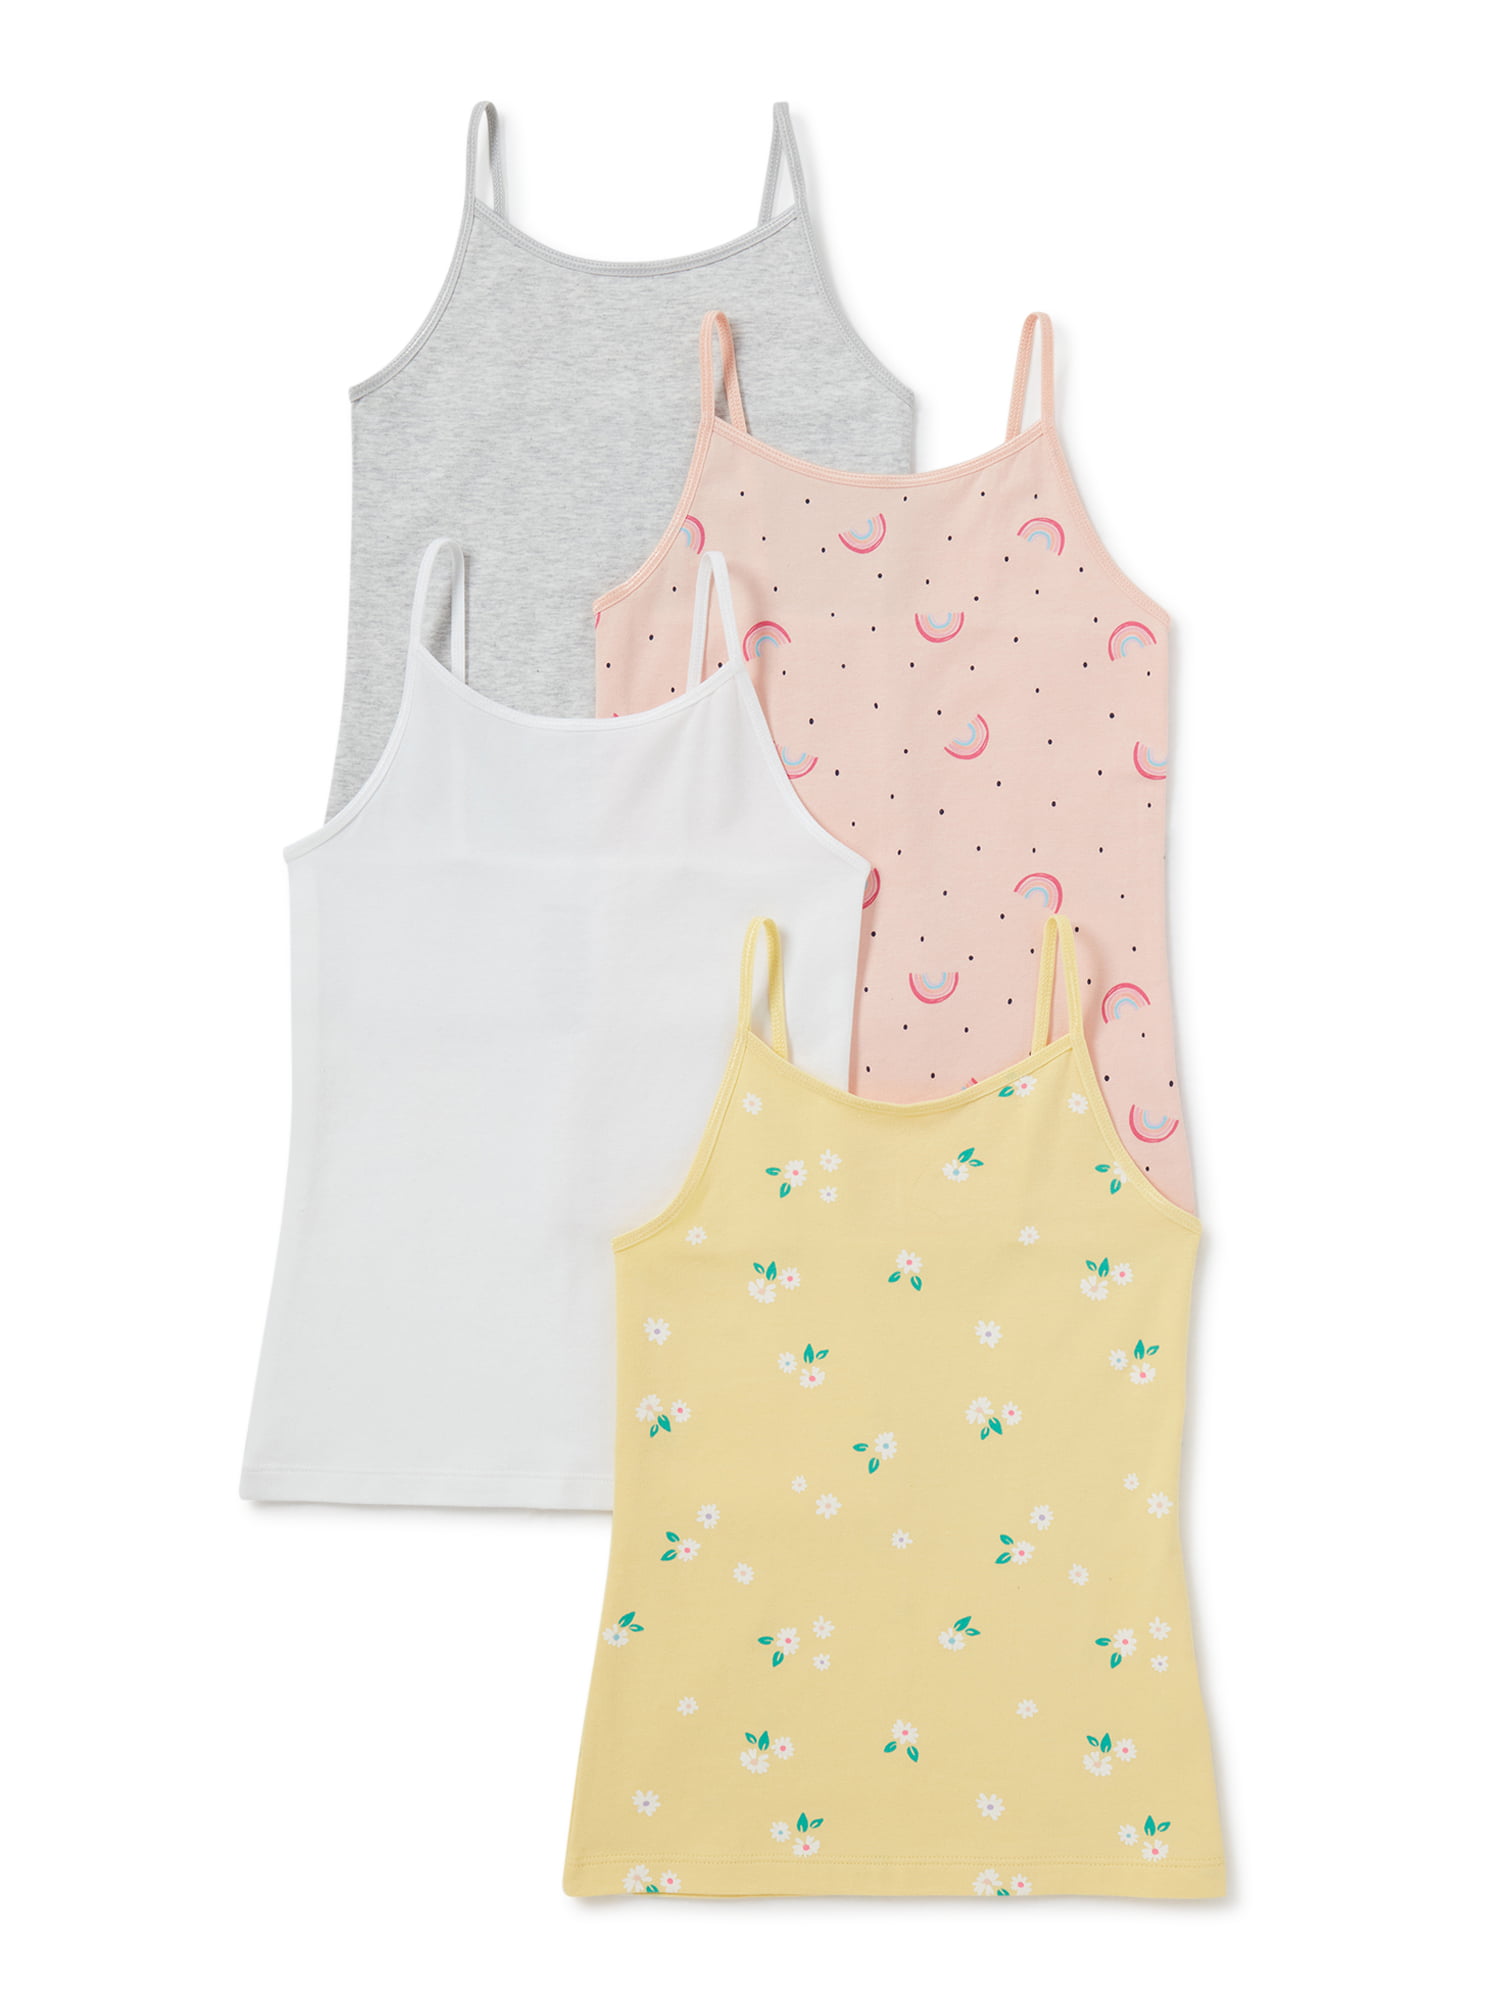 6 Pack Cotton Camisole Tank Top Limited Too Girls' Undershirt Toddler/Little Girl/Big Girl 